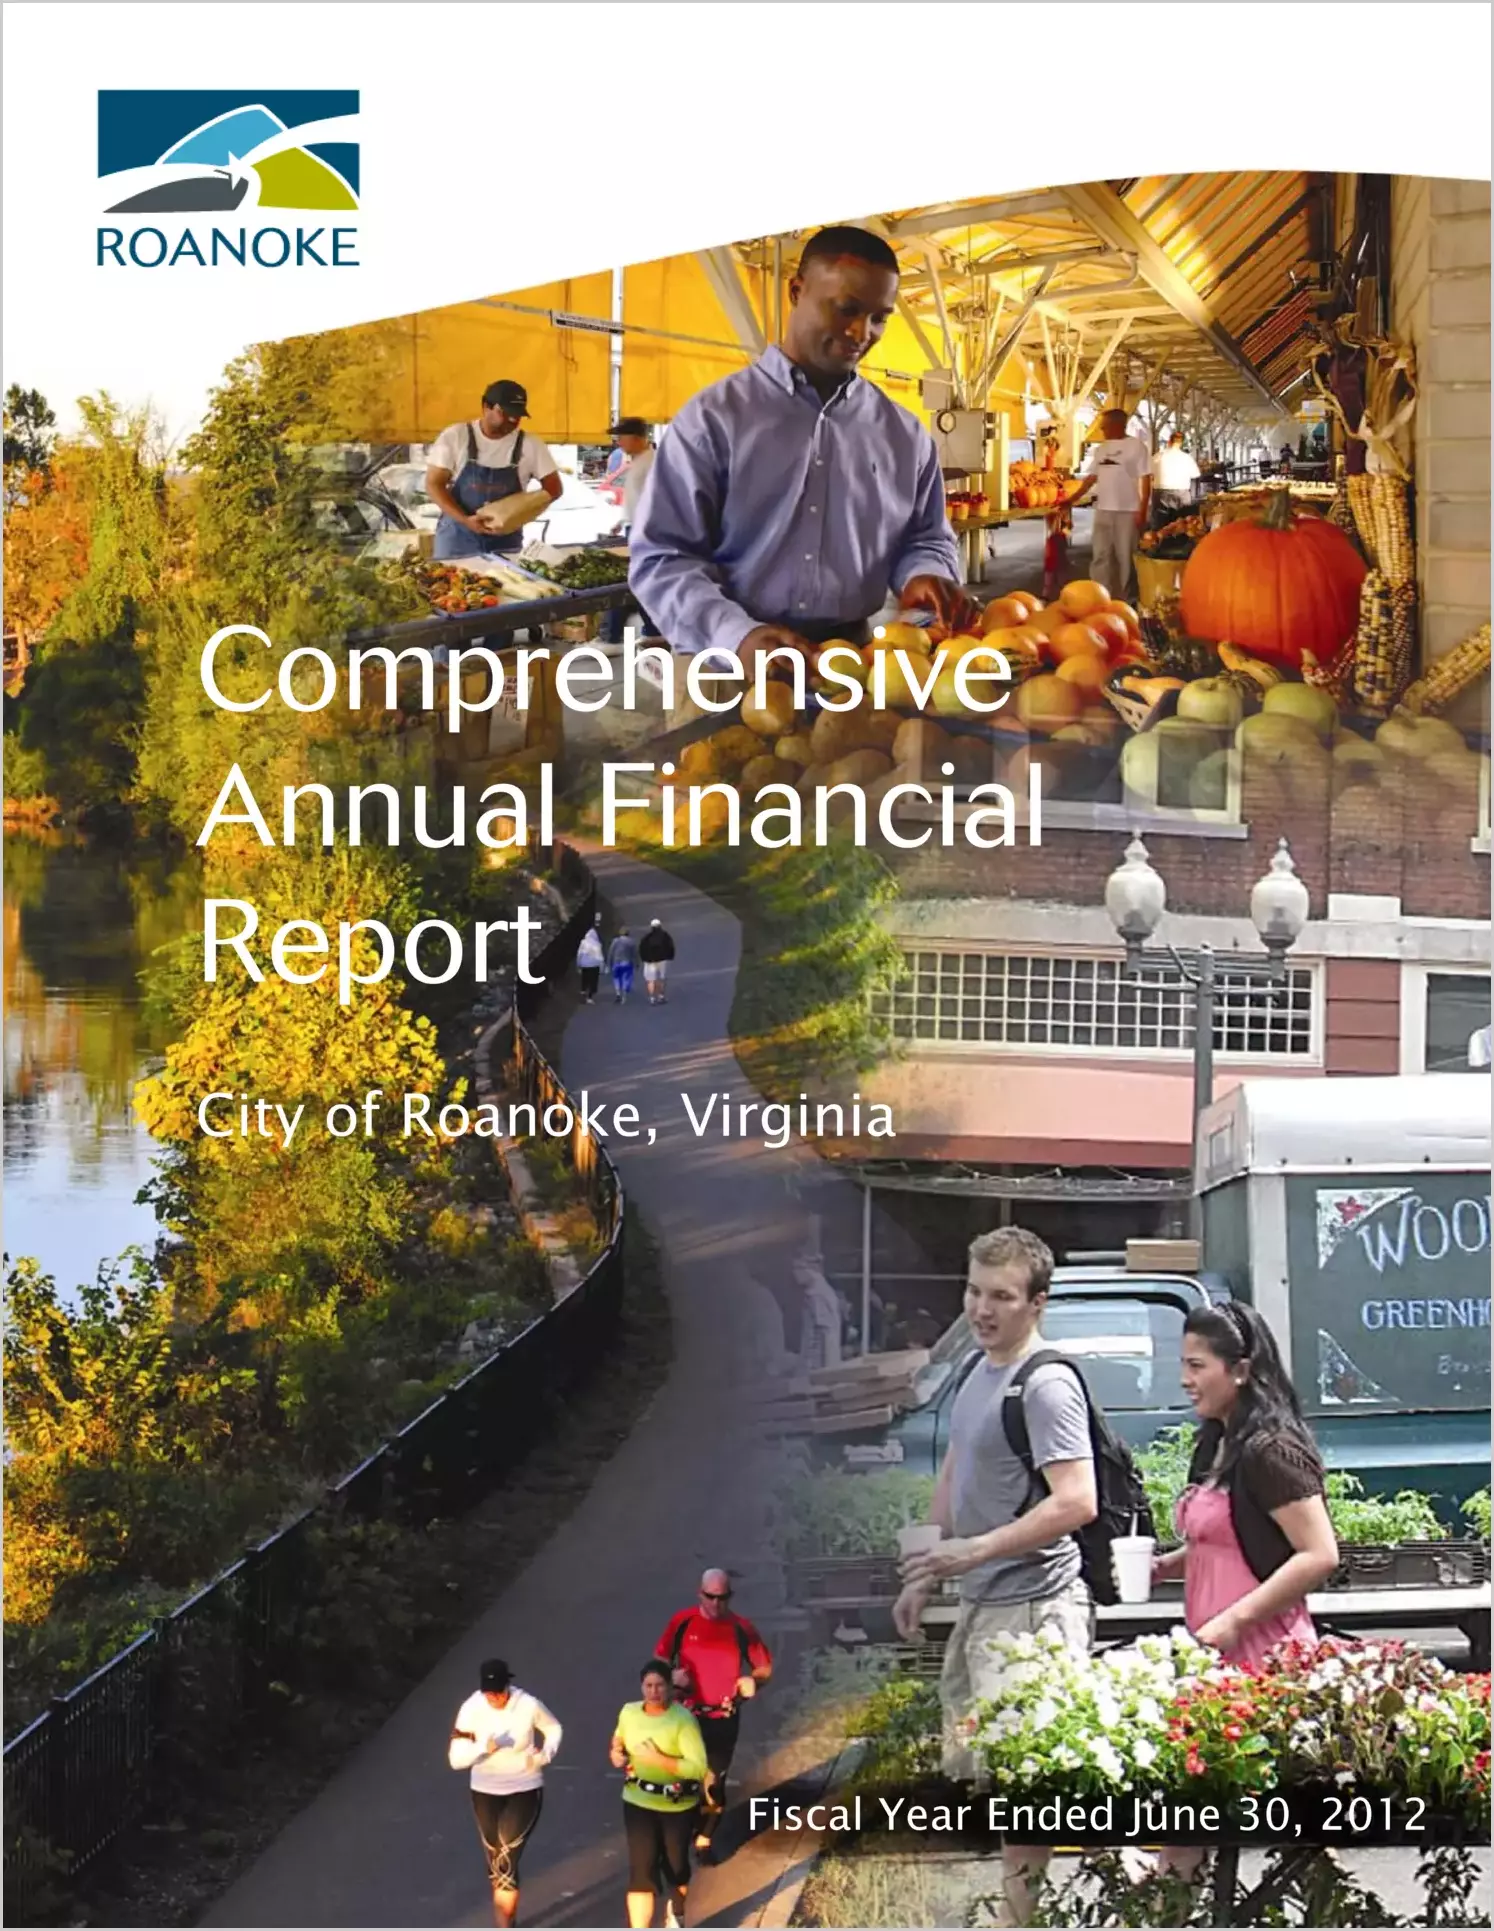 2012 Annual Financial Report for City of Roanoke